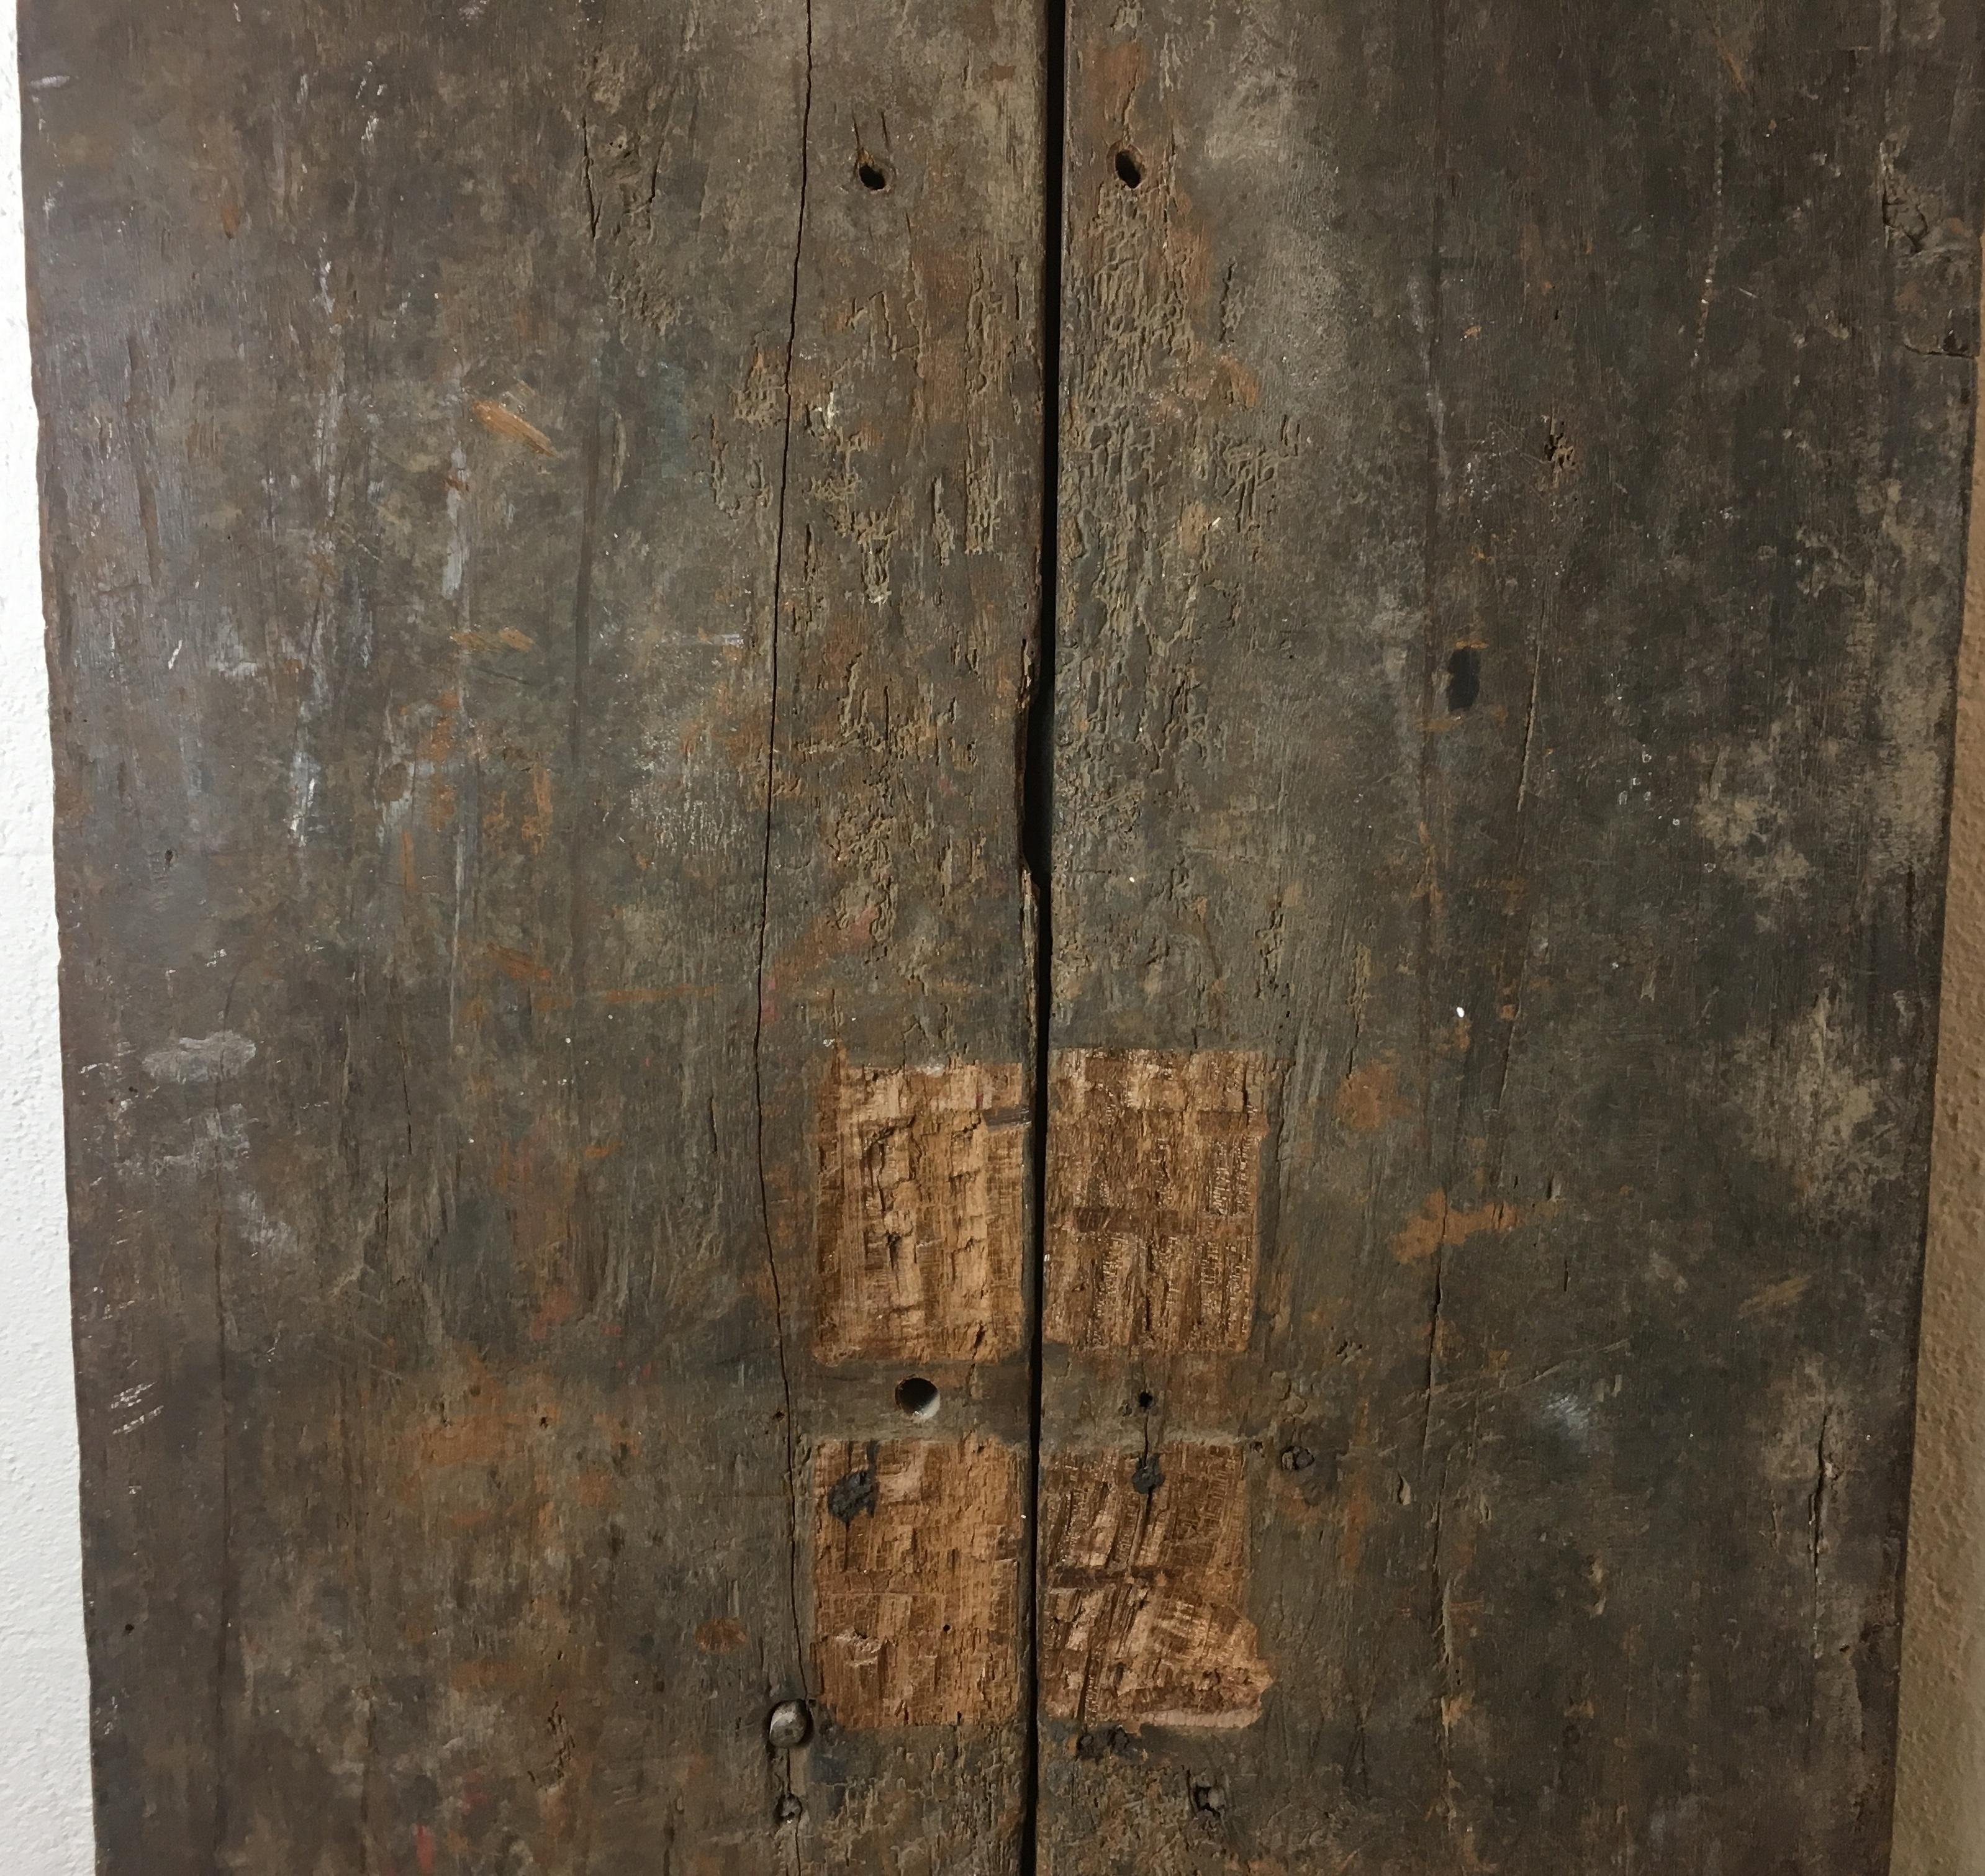 Teak Pair of 17th Century Chinese Hand-Carved Doors or Decorative Wall Panels